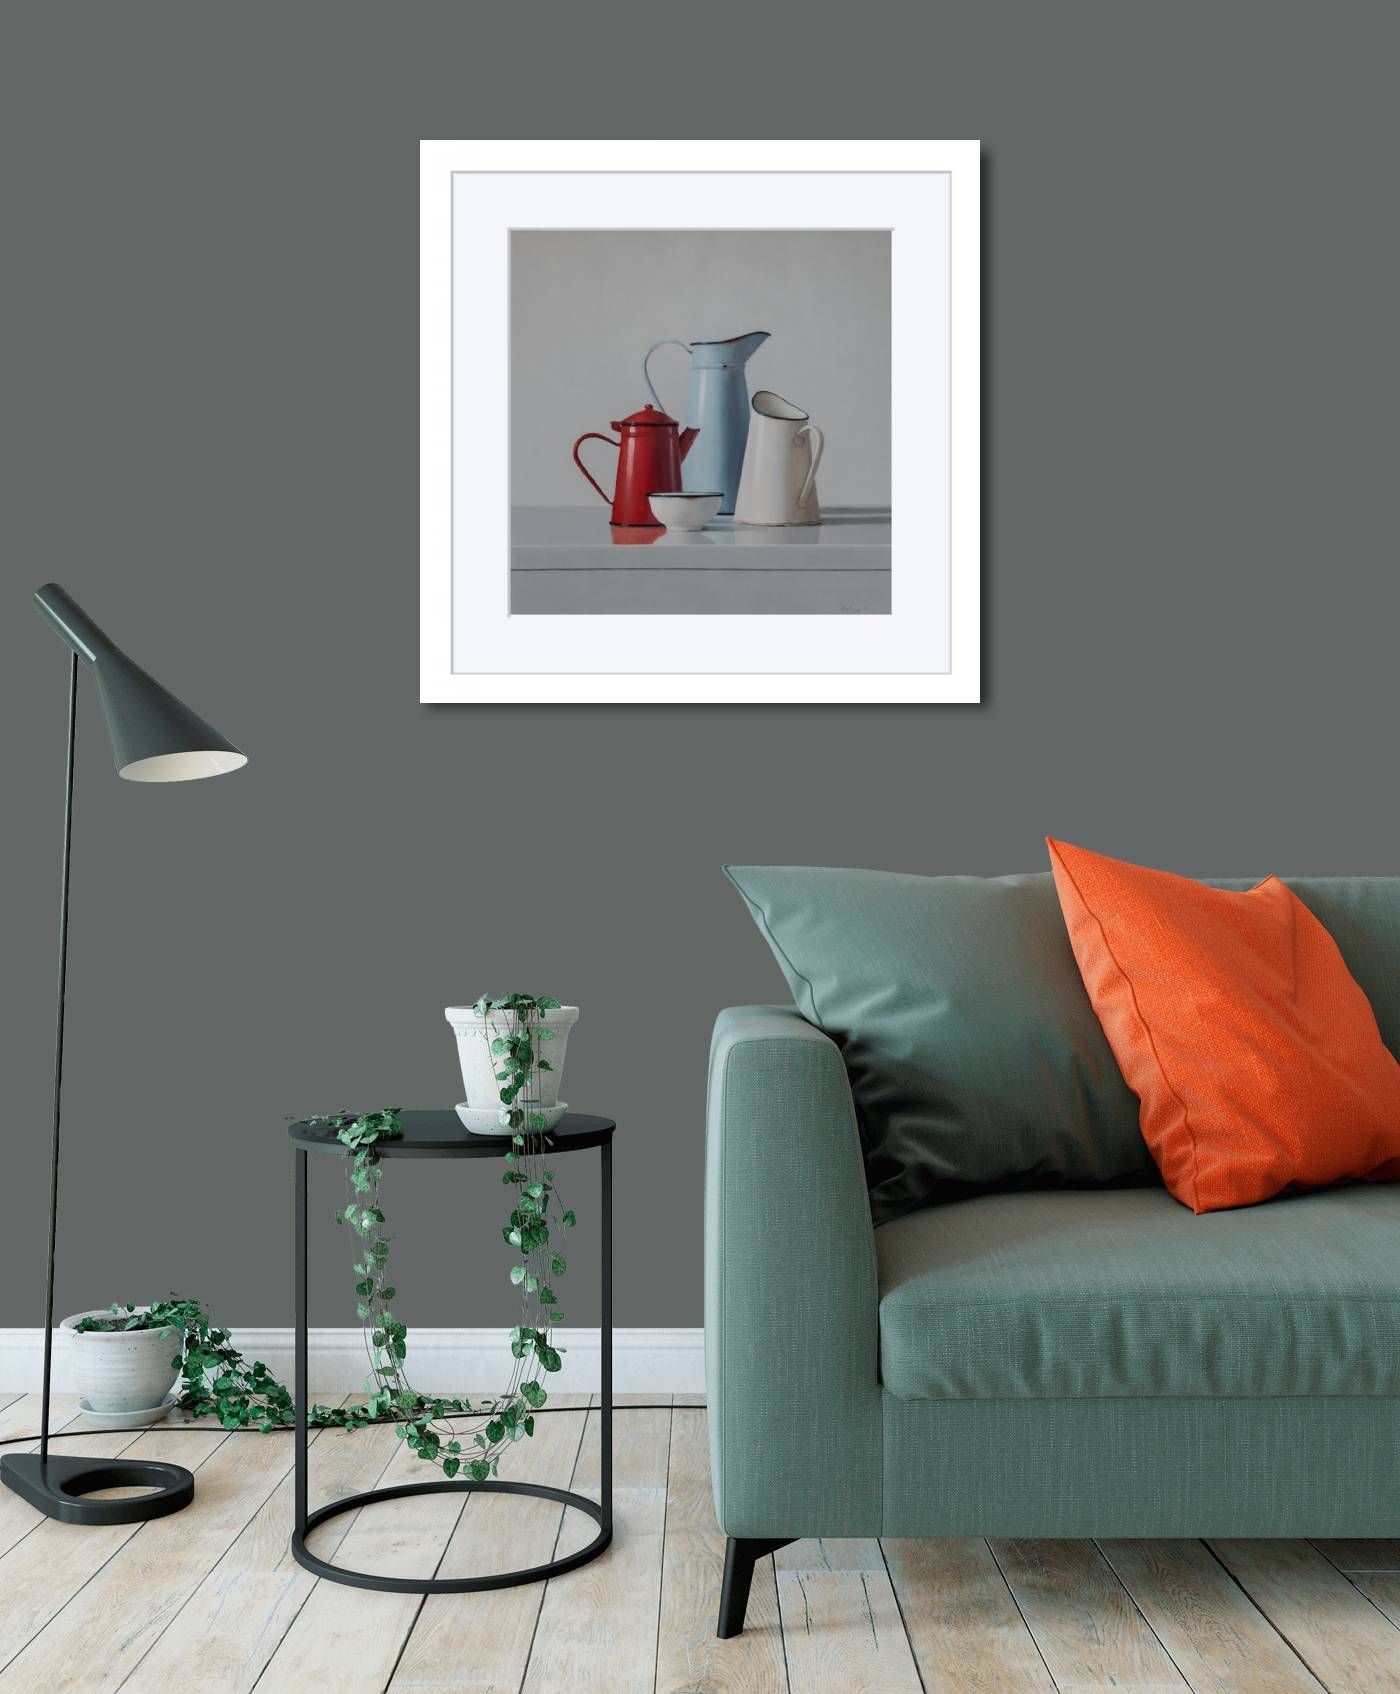 Large framed - One Red Jug by Peter Dee